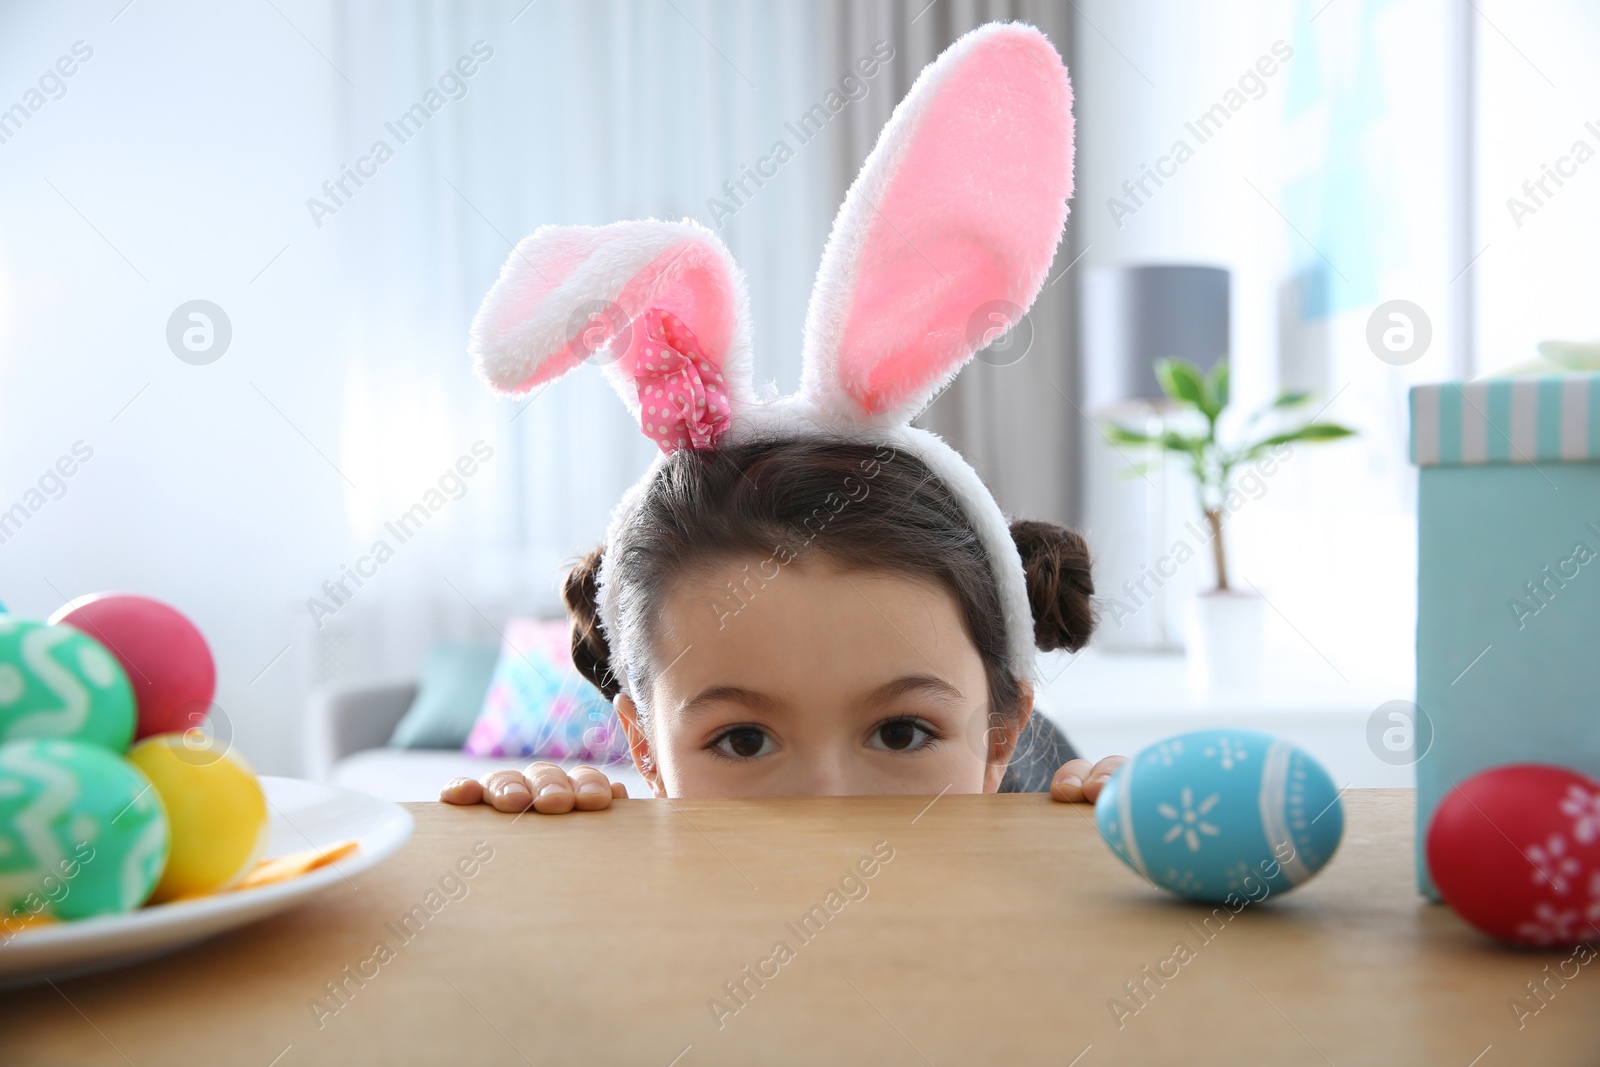 Photo of Cute little girl wearing bunny ears headband hiding behind table with painted Easter eggs in room